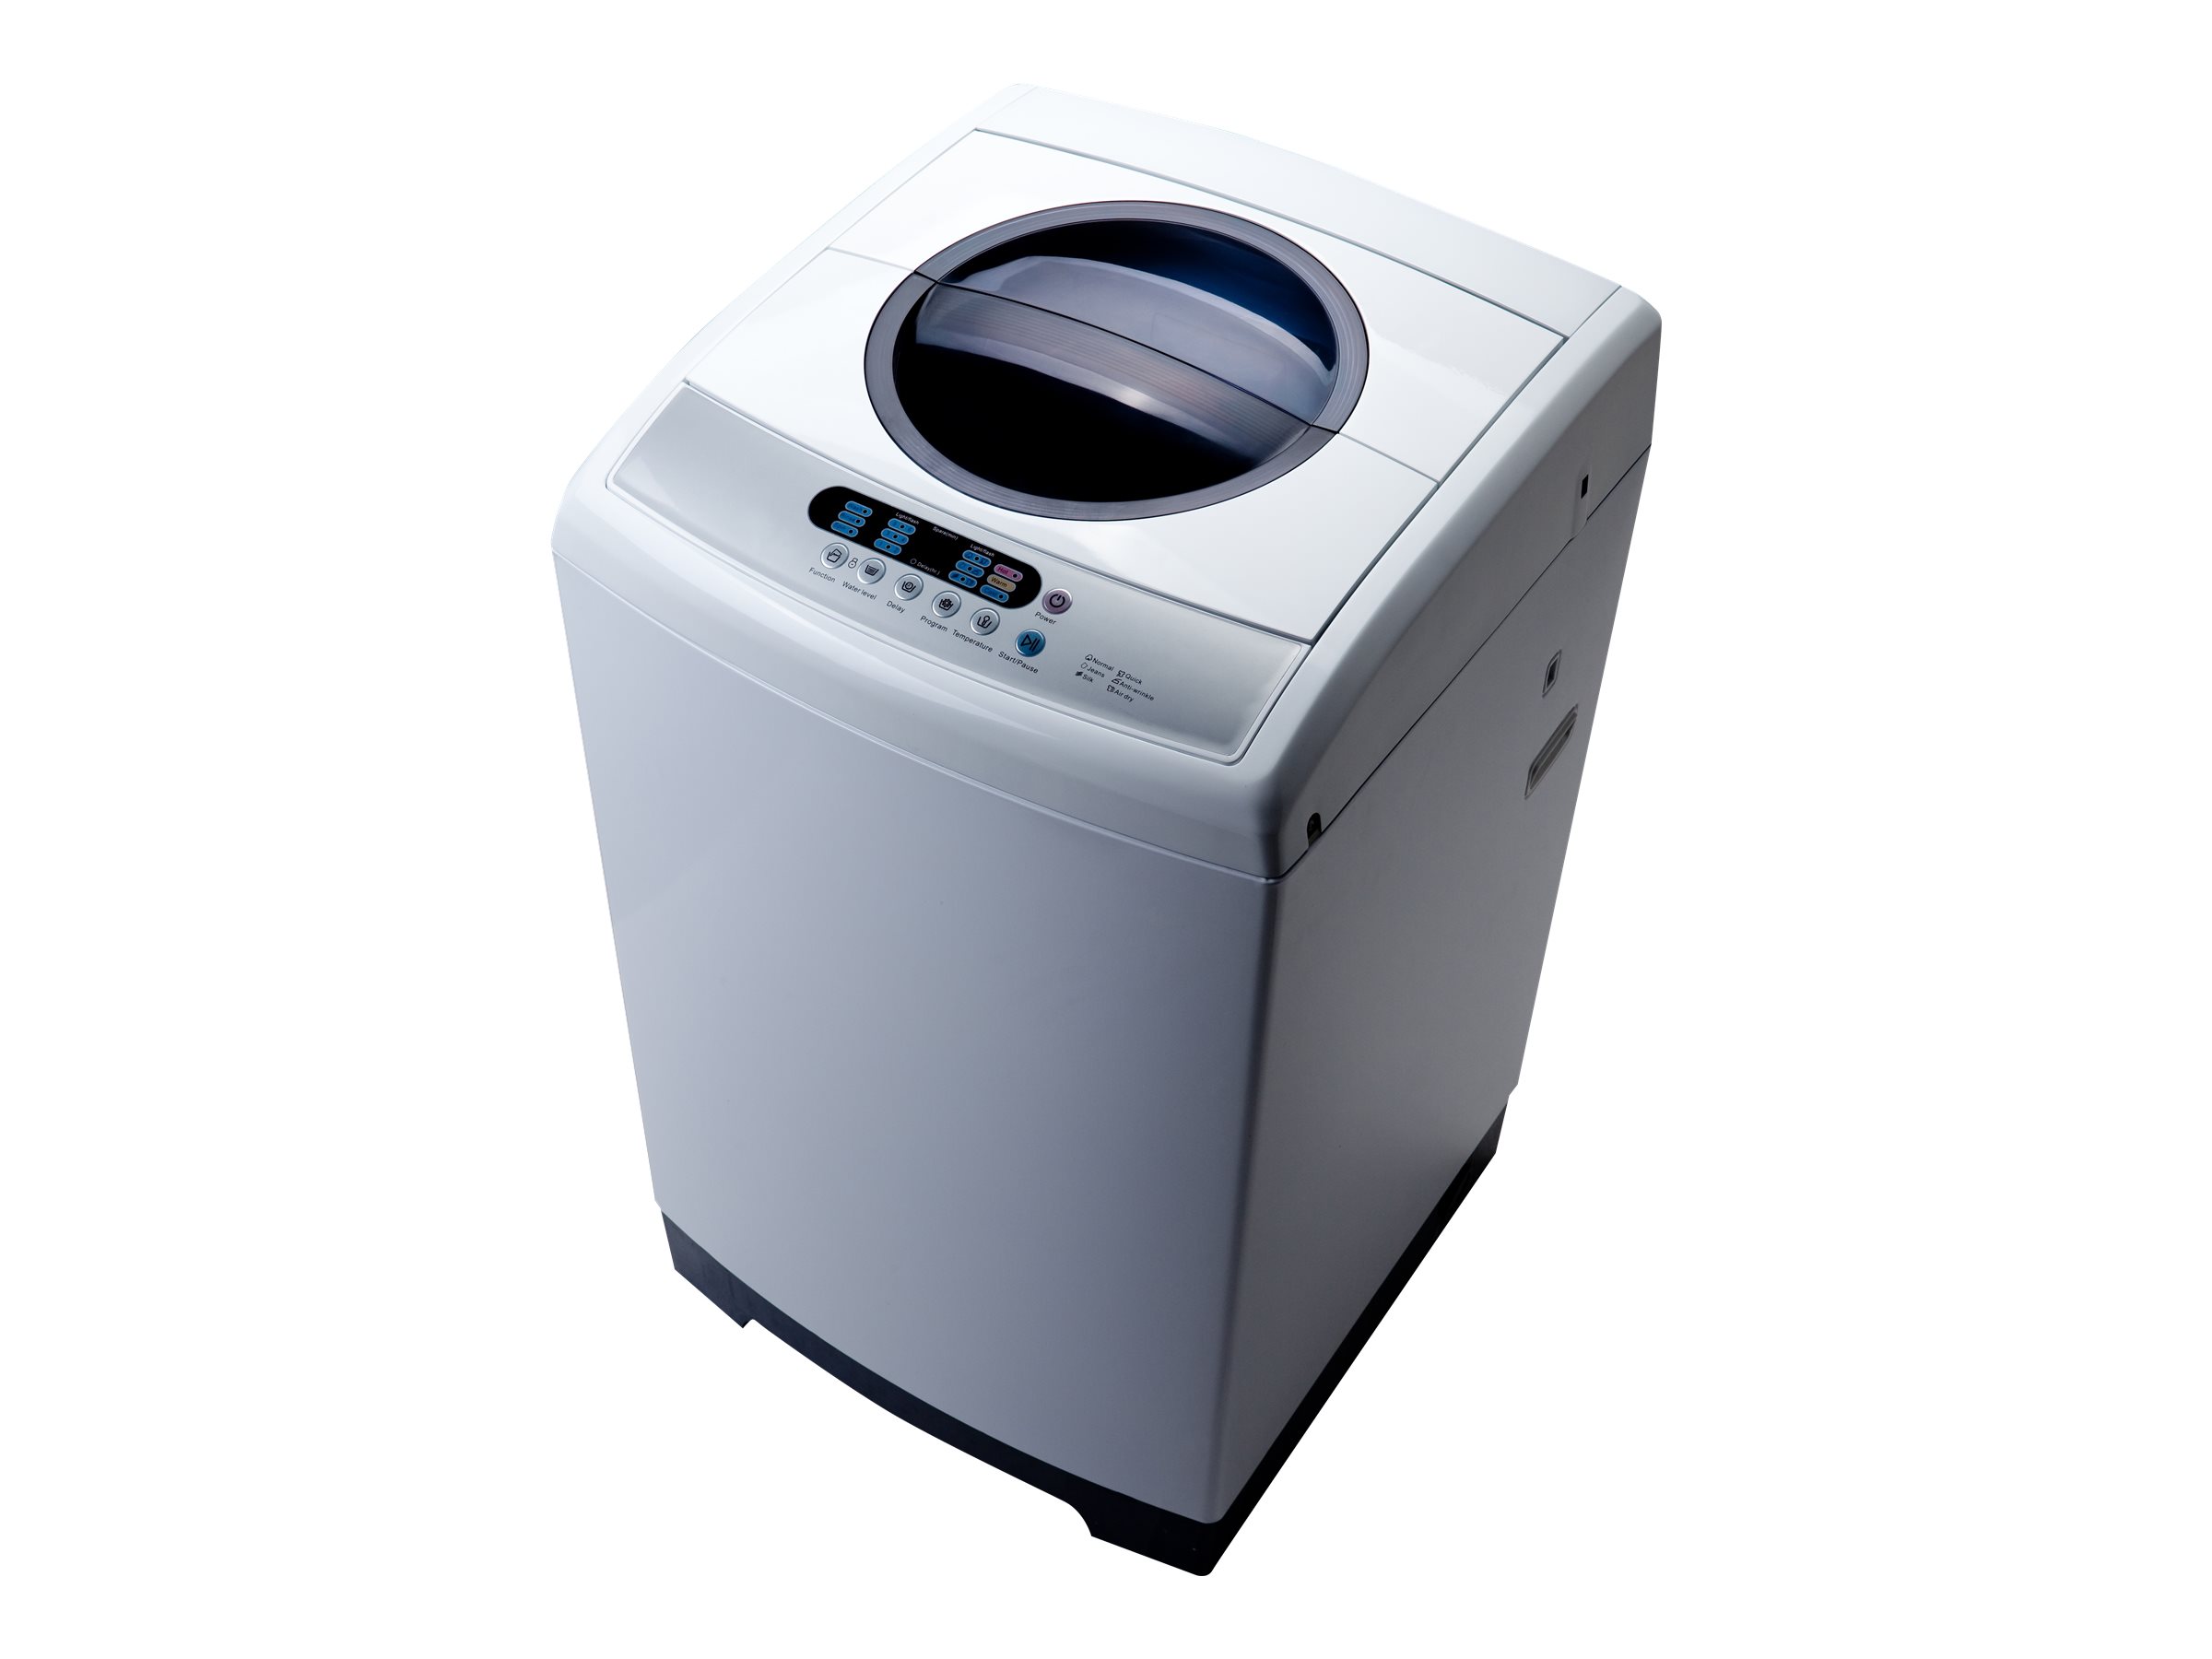 RCA 1.6 cu ft Portable Washer RPW160, White - image 1 of 2